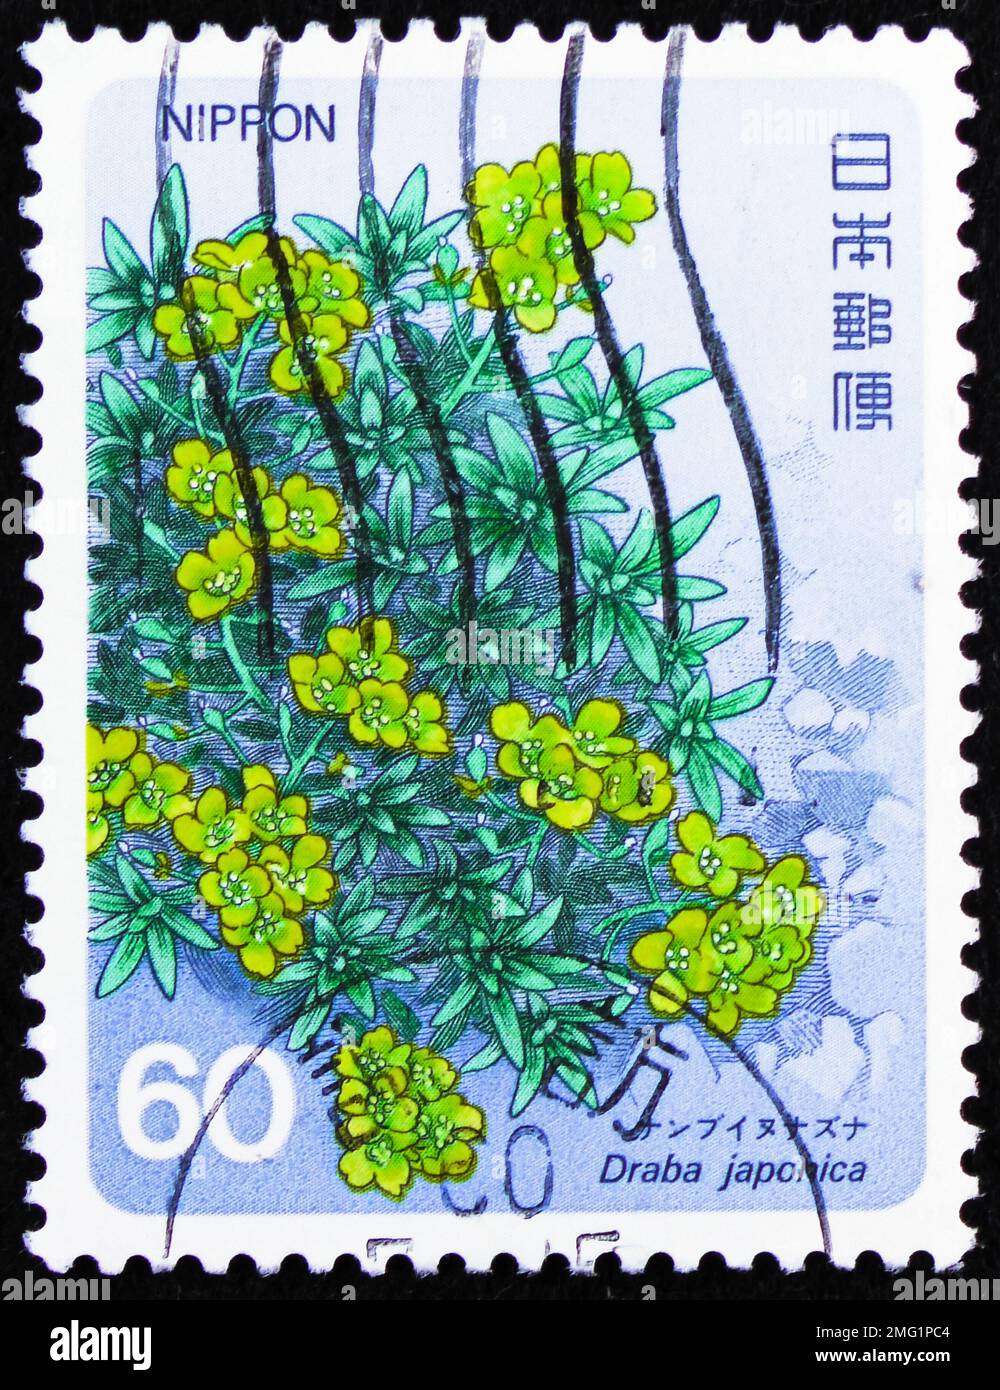 MOSCOW, RUSSIA - DECEMBER 25, 2022: Postage stamp printed in Japan shows Draba japonica, Alpine Plants (4th series) serie, circa 1985 Stock Photo